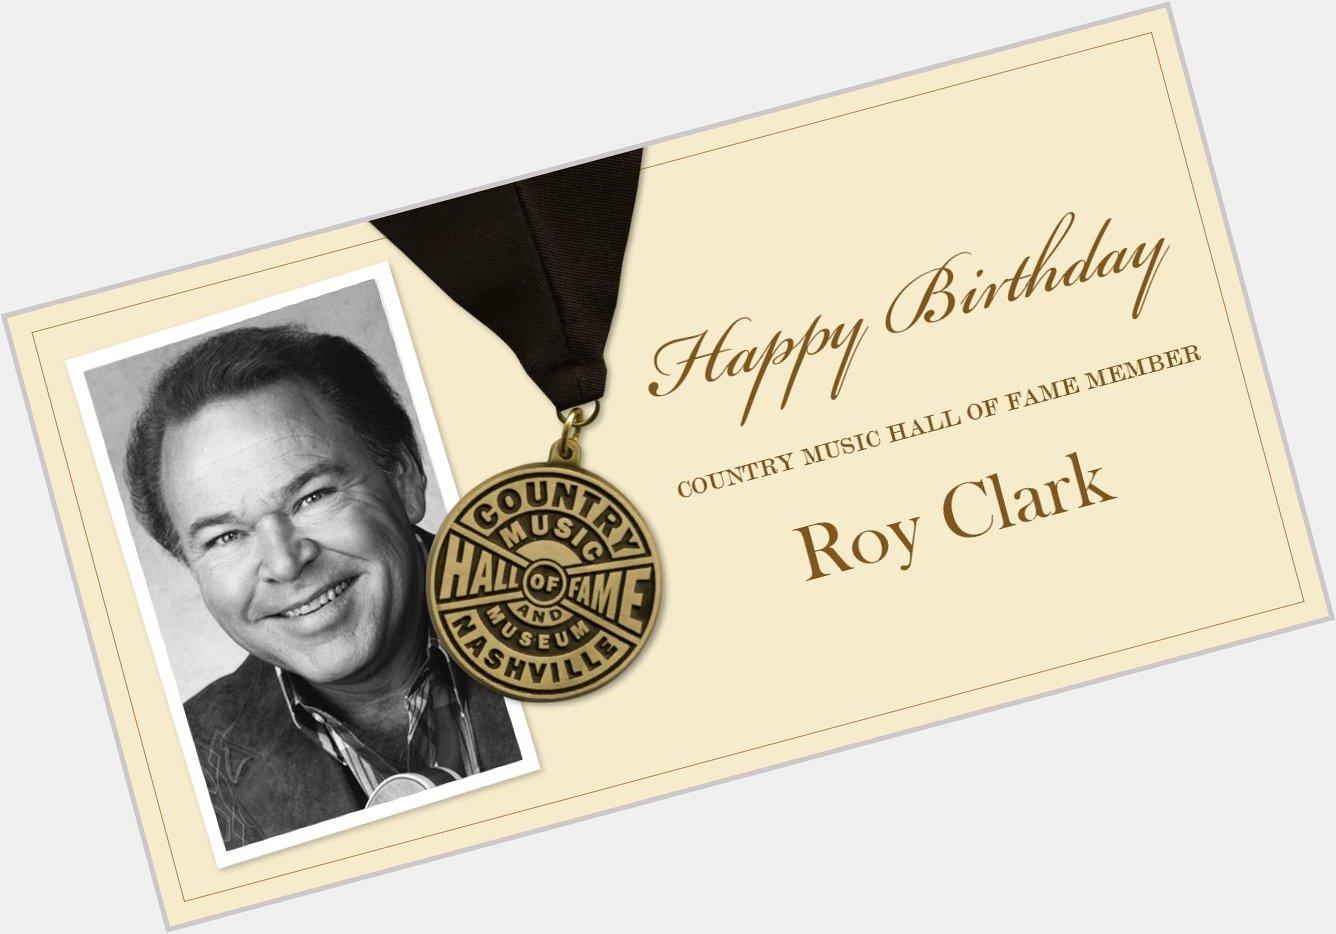 It\s a good day when it\s Roy Clark\s birthday! Join us in wishing this member a very happy birthday! 